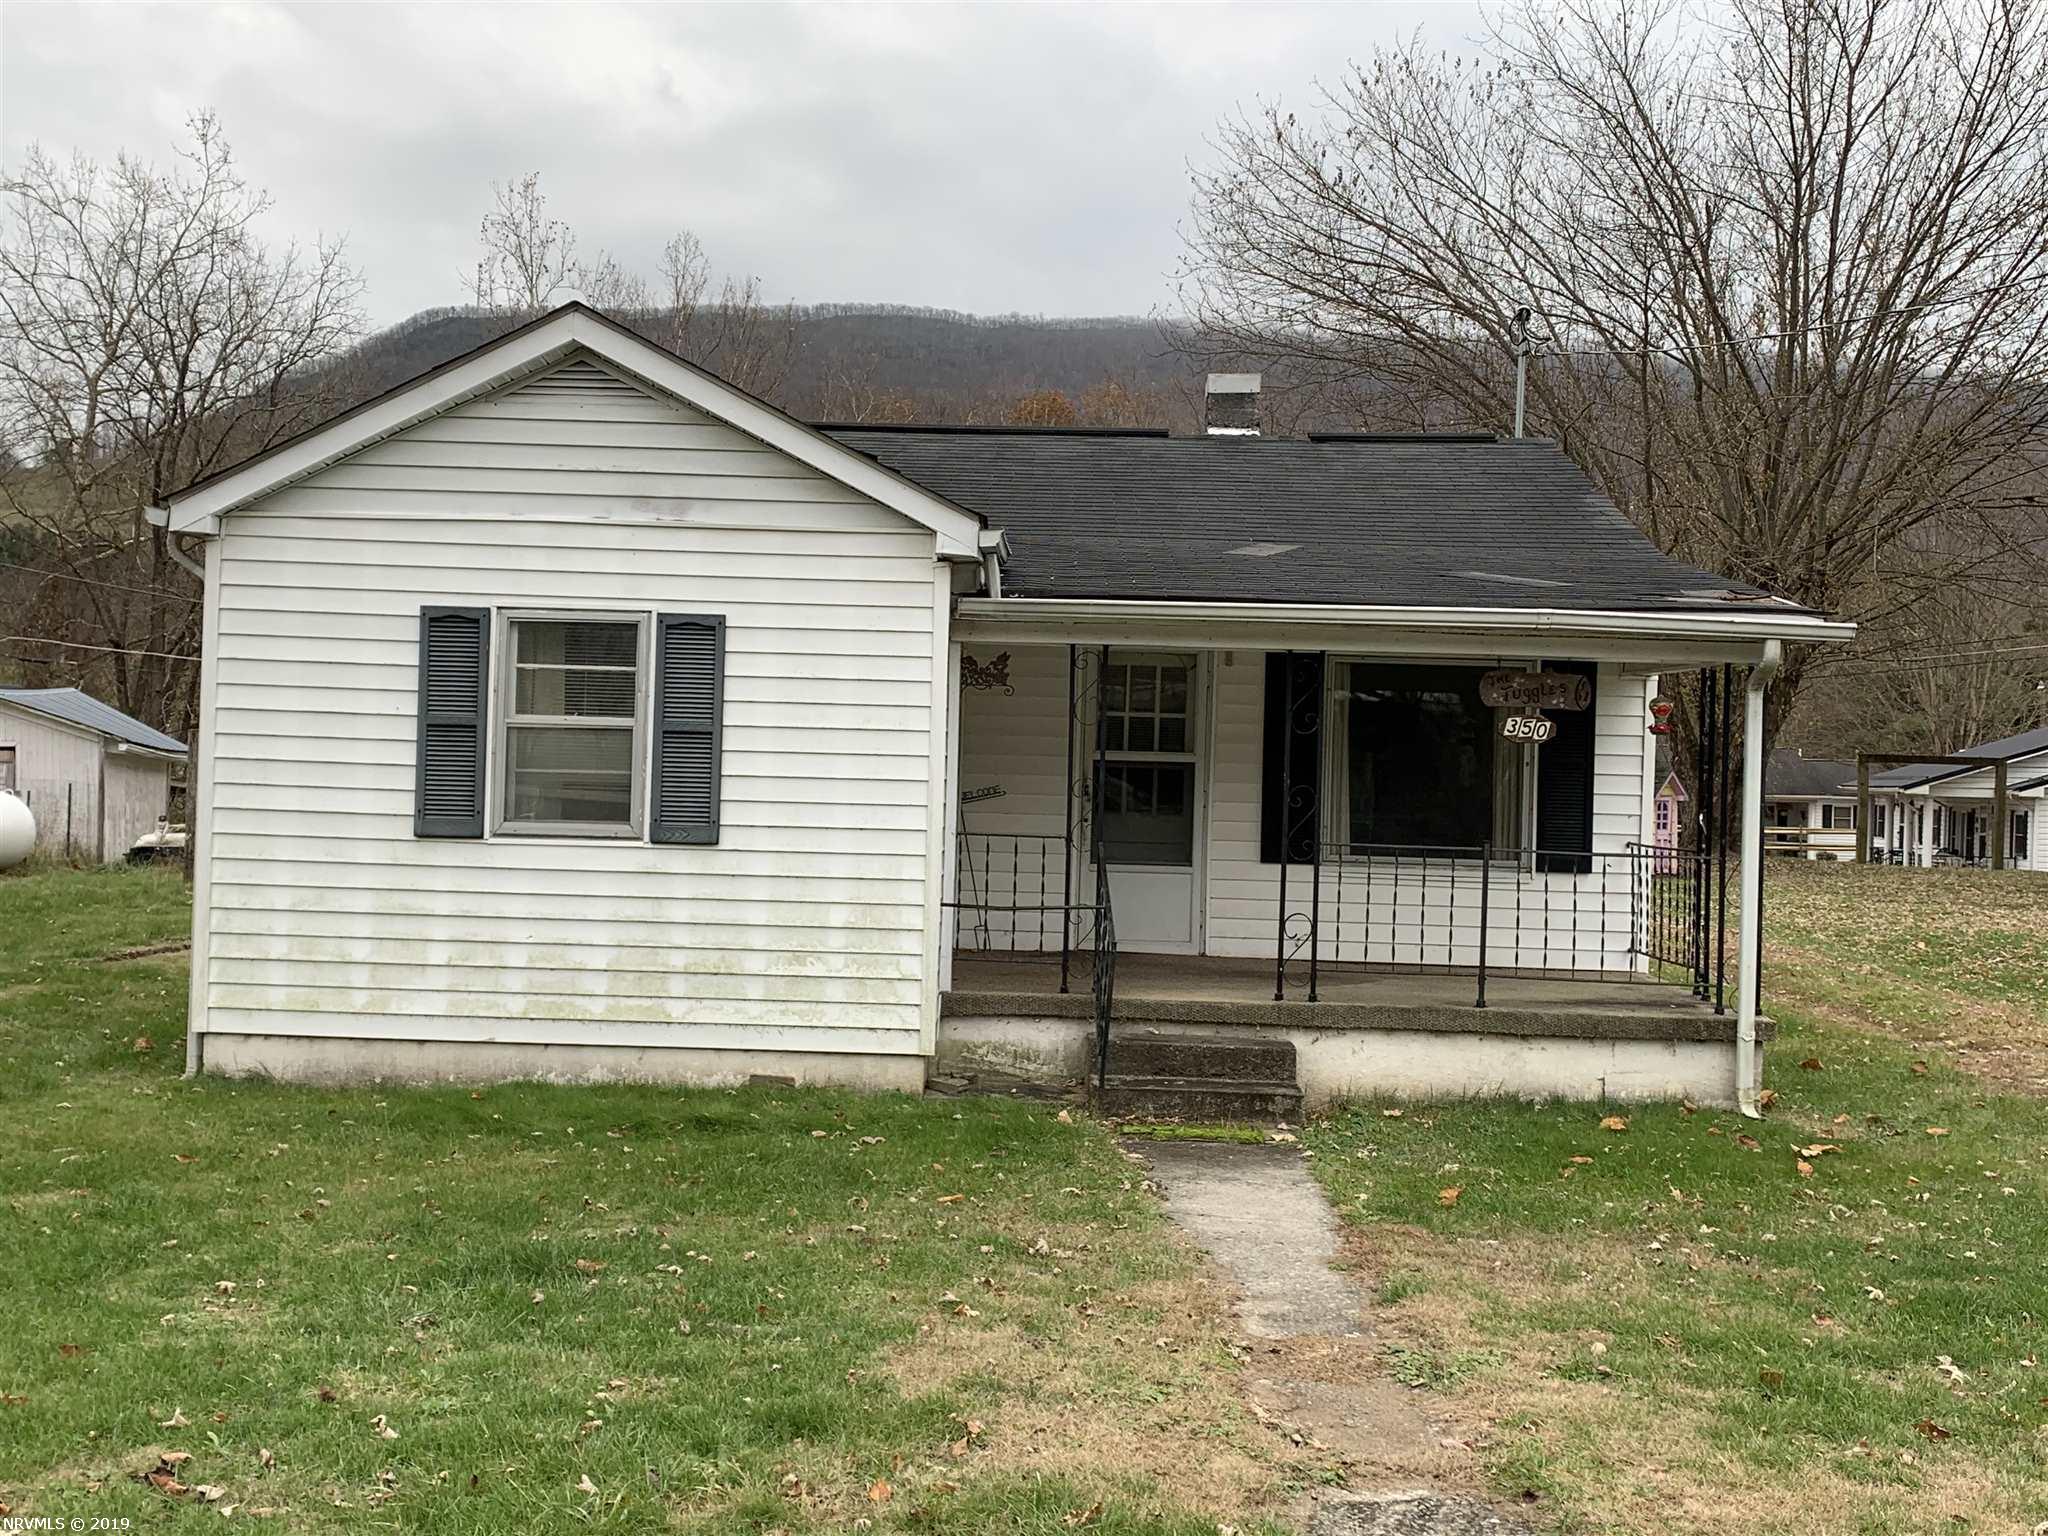 This 2 bed 1 bath home is located right in the middle of Rocky Gap. It is close to the gas station, post office and Bland Intermediate and High School. This house sits on a beautiful .5+/- acre lot. There is a detached carport with two sheds for storage.